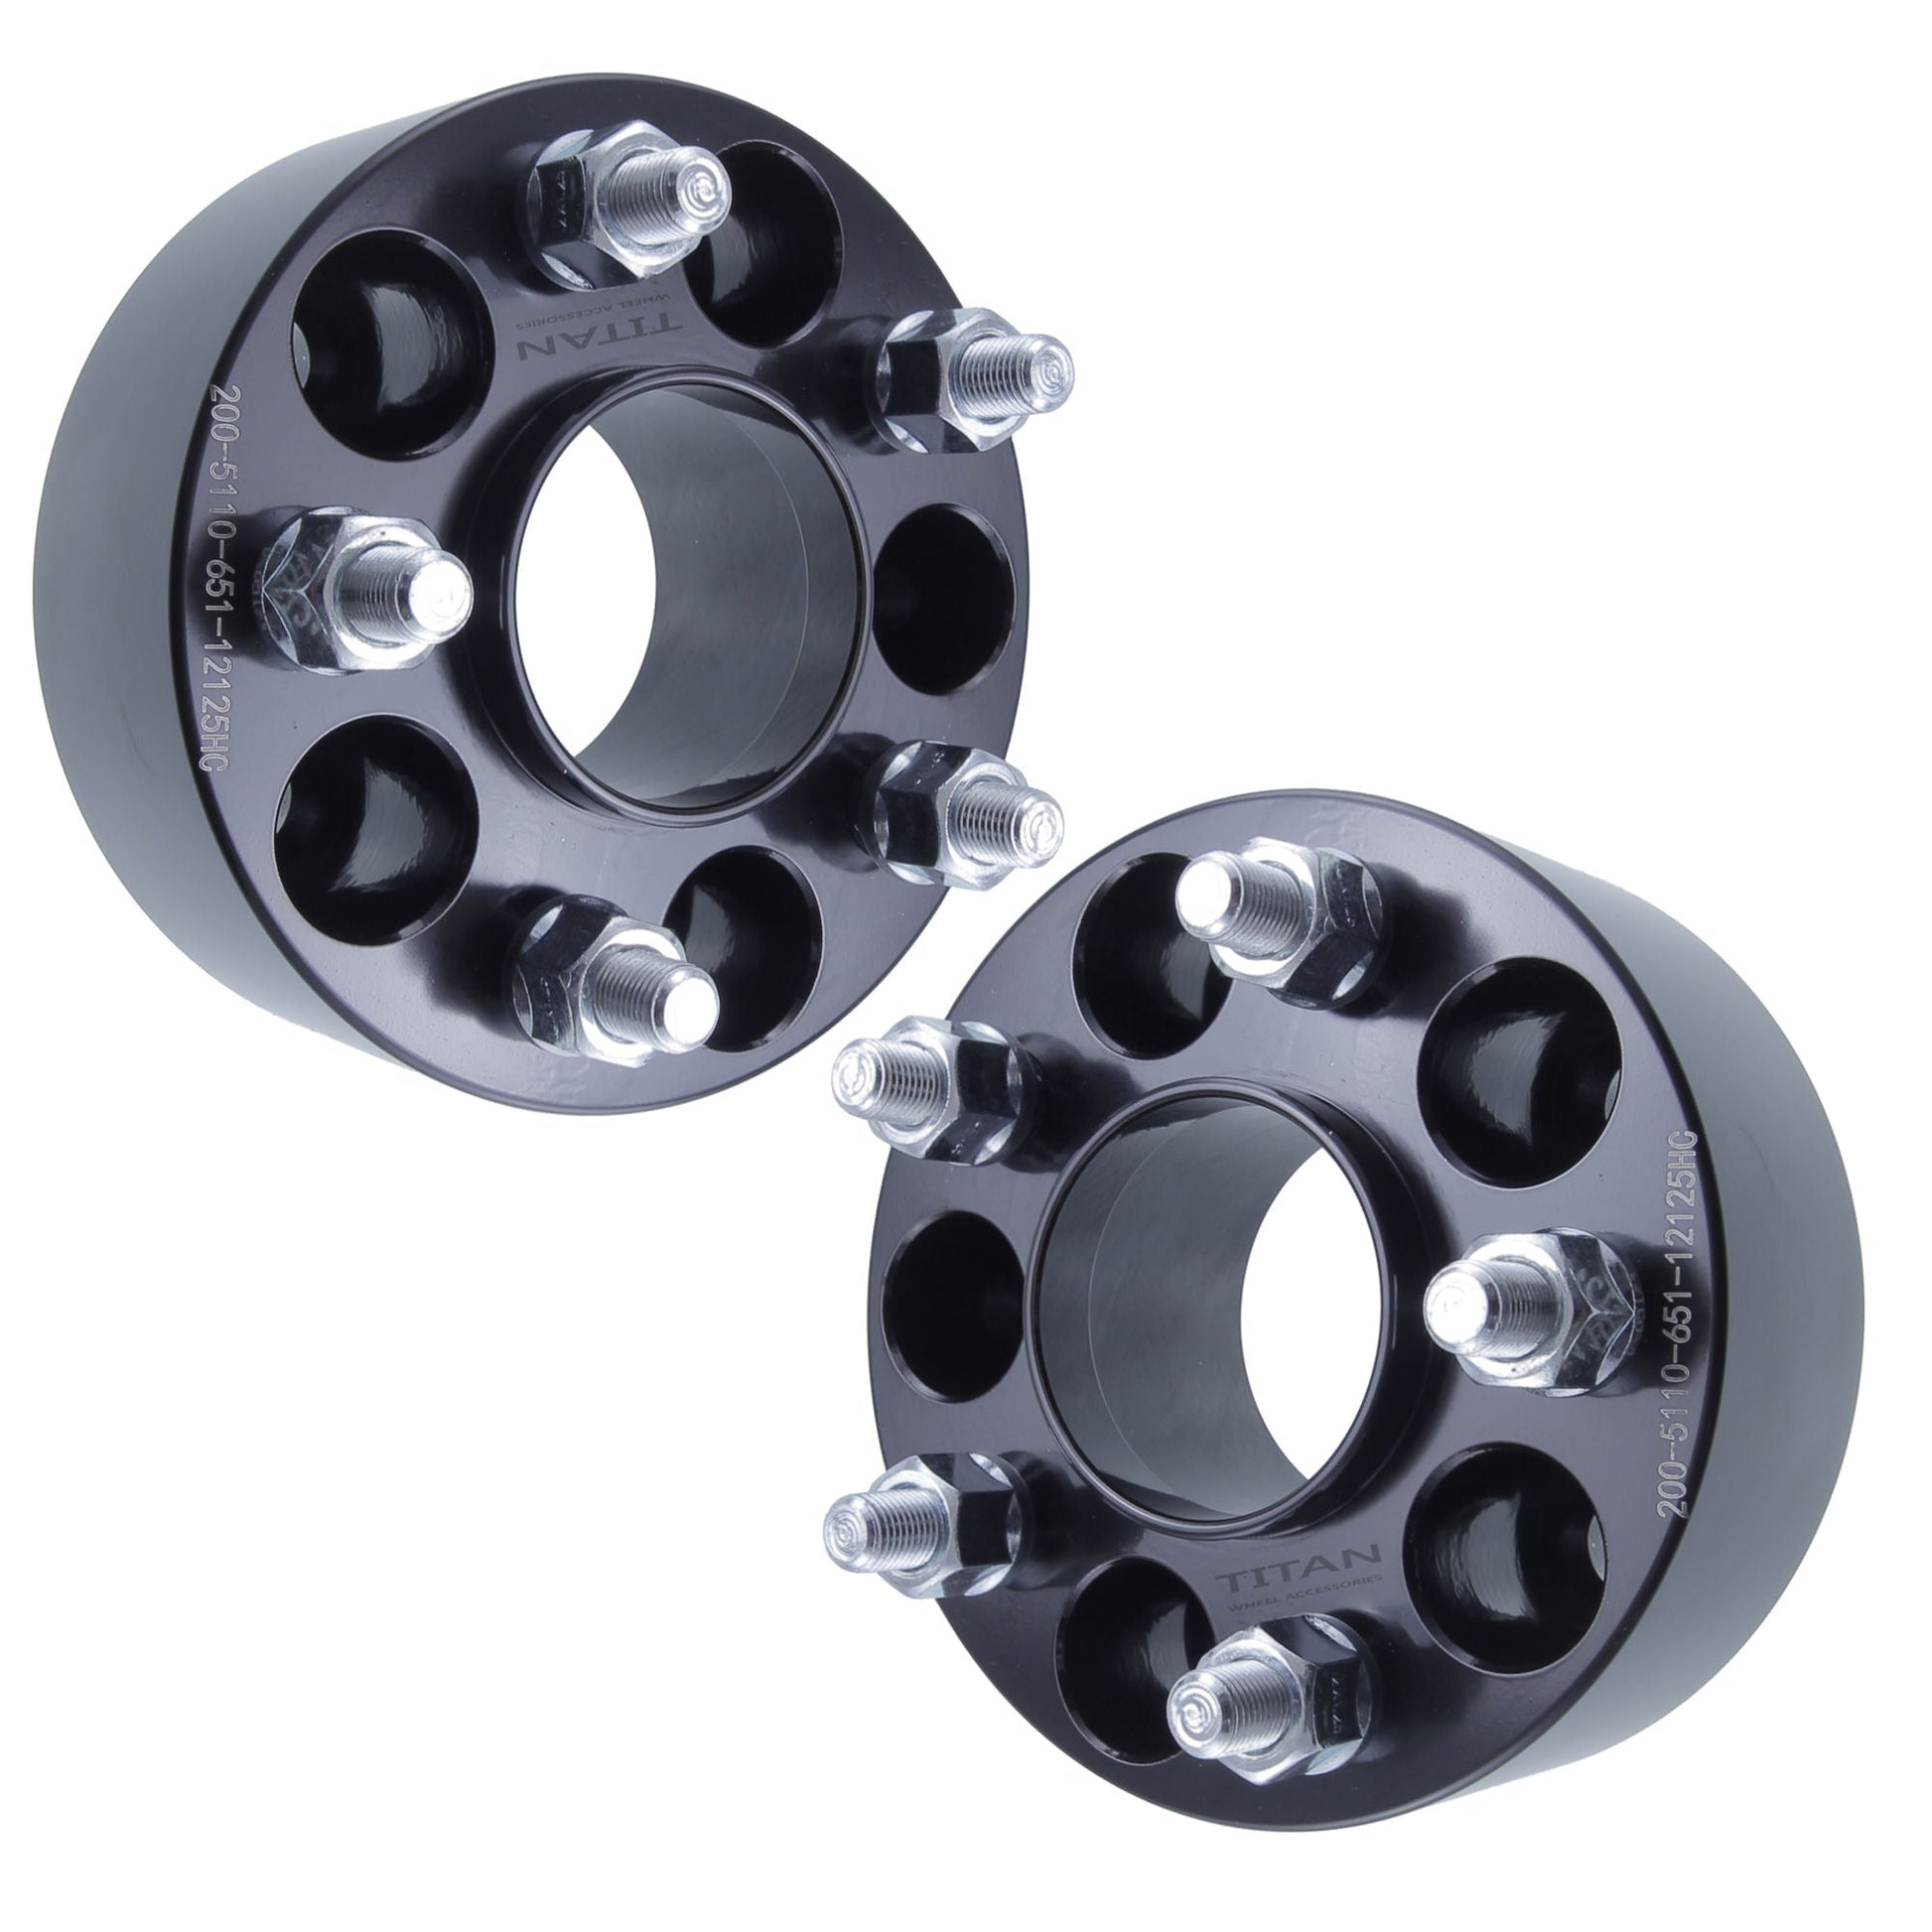 38mm (1.5") Titan Wheel Spacers for Jeep Cherokee Compass Renegade Chrysler 200 | 5x110 | 65.1 Hubcentric |12x1.25 Studs | Set of 4 | Titan Wheel Accessories